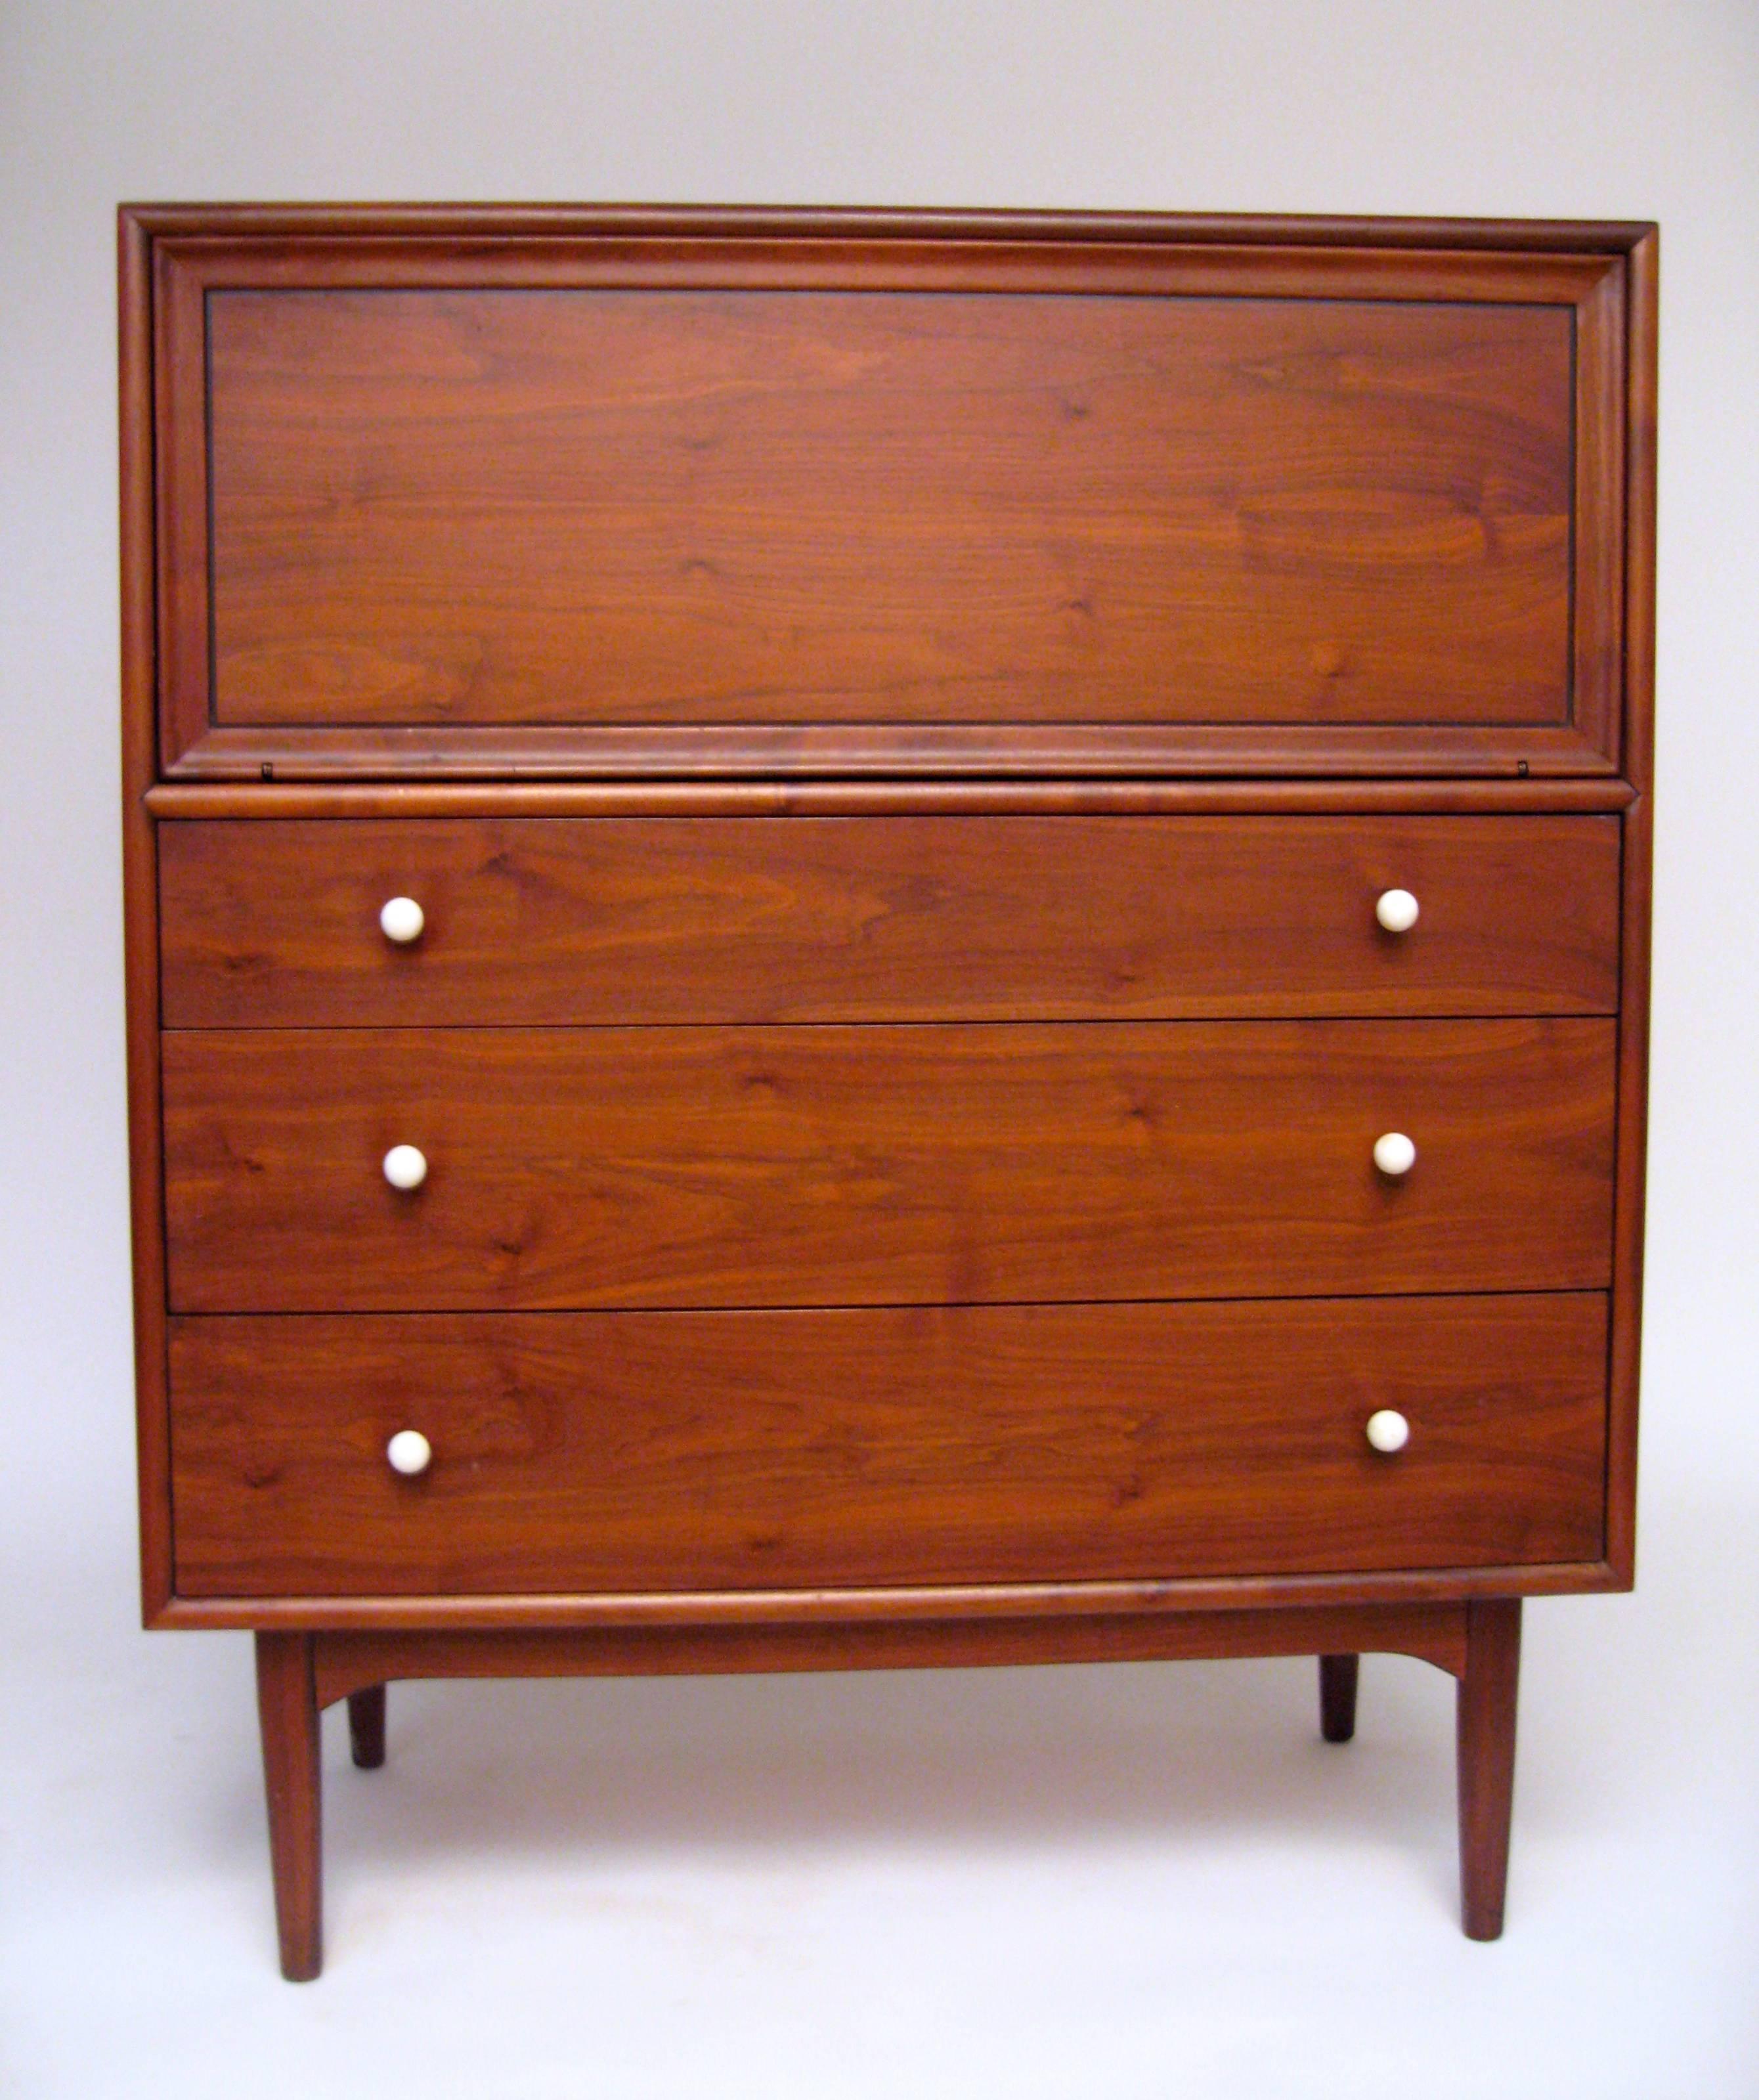 Declaration for Drexel series designed by Kipp Stewart and Stewart MacDougall. Made of wonderfully figured solid and walnut veneers. Tapered legs. Two hidden divided drawers over three drawers. Small plastic caddy for tie clips or cuff links. Round